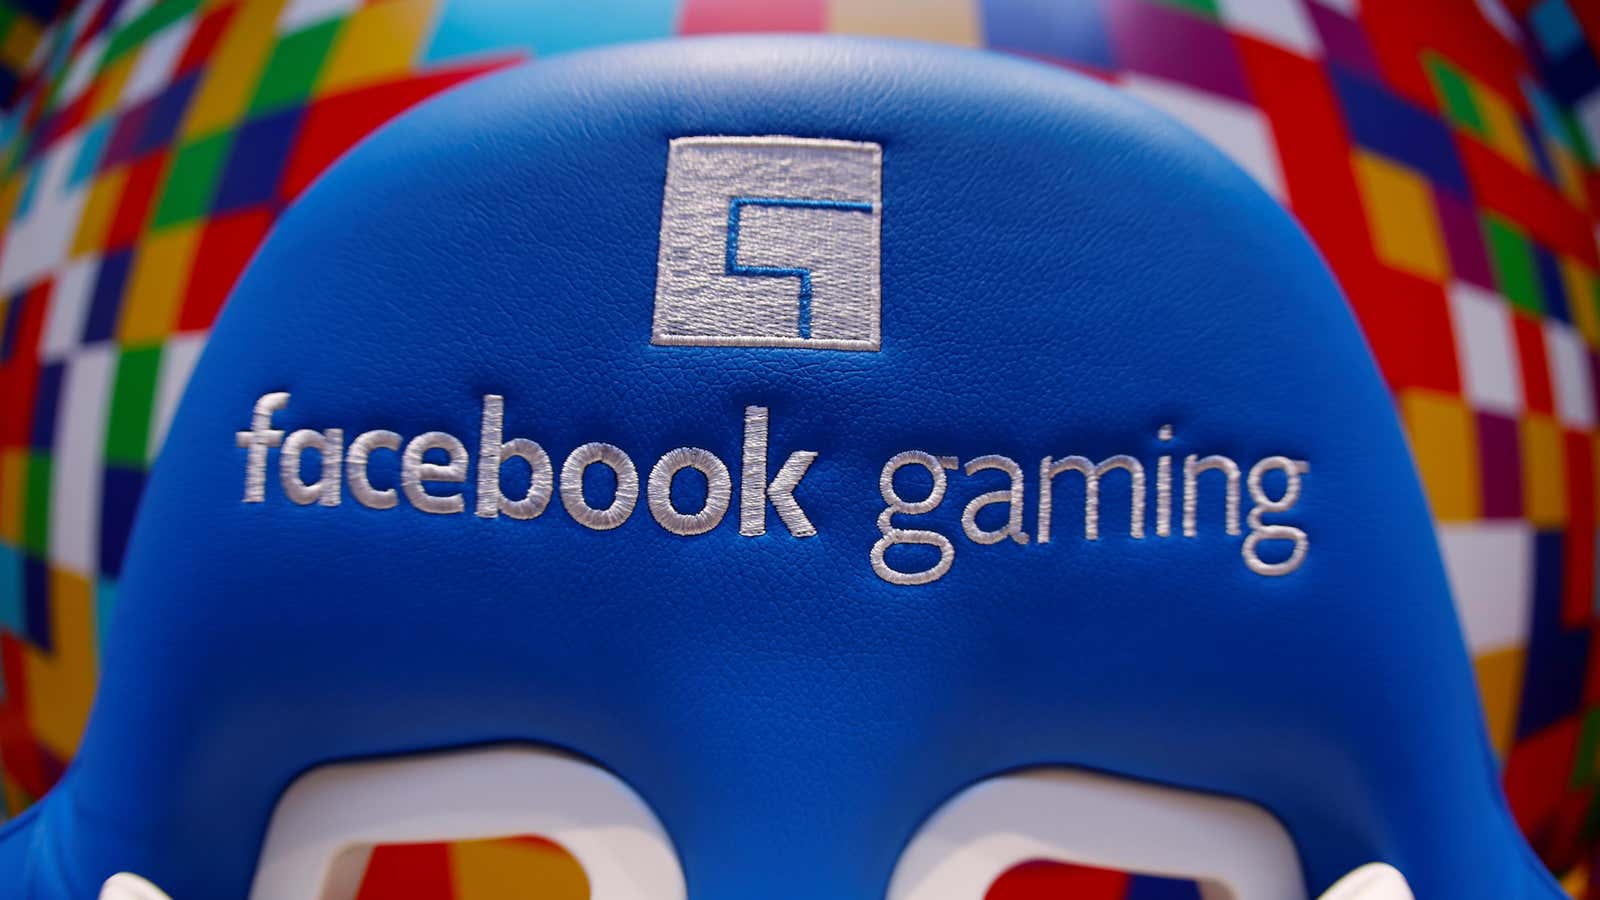 The next theater of Big Tech’s gaming proxy war is in the cloud.